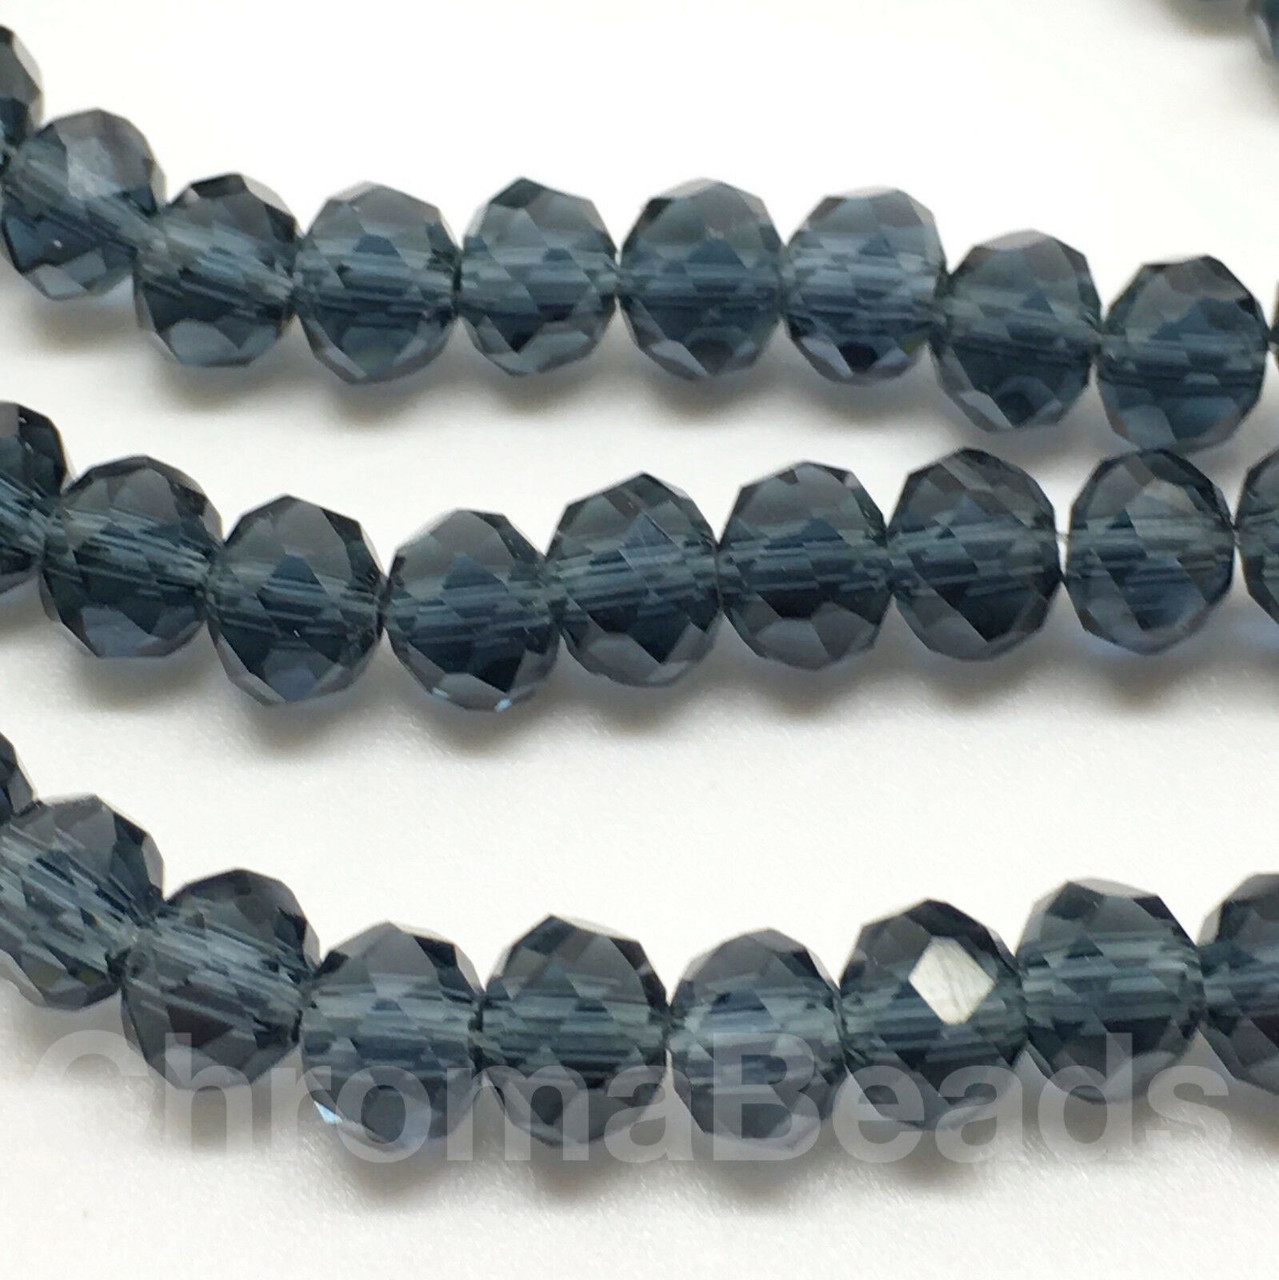 3x2mm Glass Rondelle beads - DARK GREY - approx 15" strand (approx 200 beads)